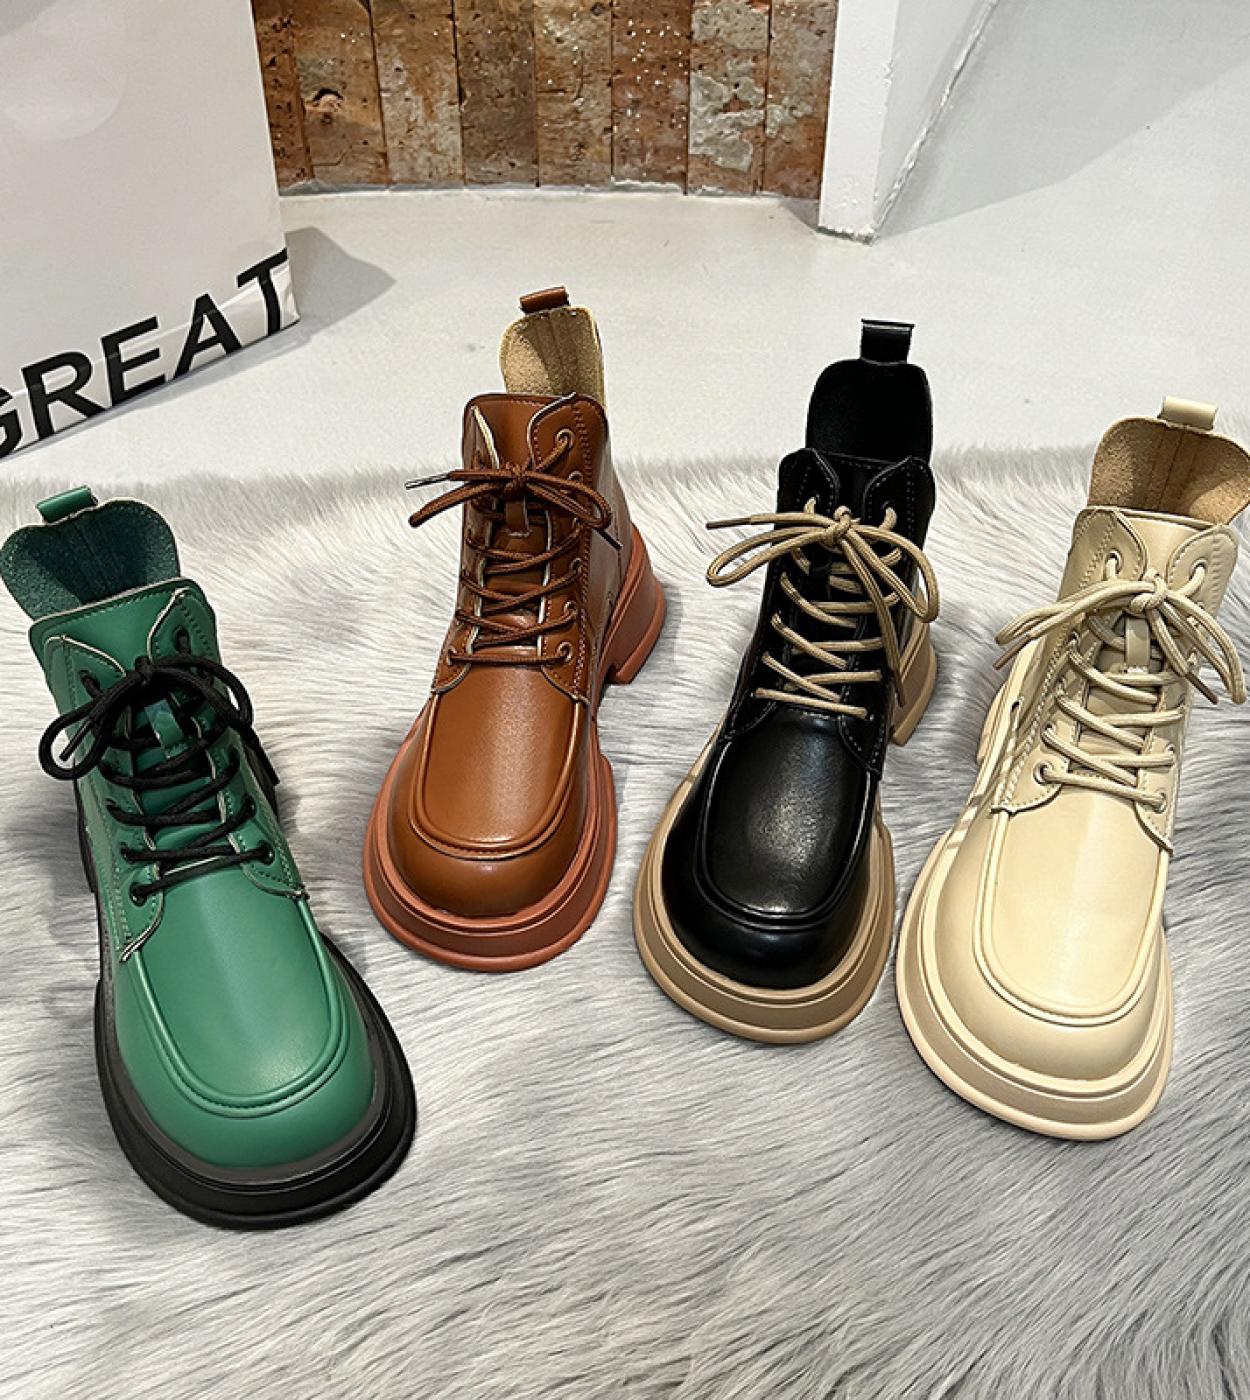 2022 New Womens Ankle Boots Women Autumn Winter Round Toe Lace Up Shoes Women Fashion Casual Motorcycle Platform Short 